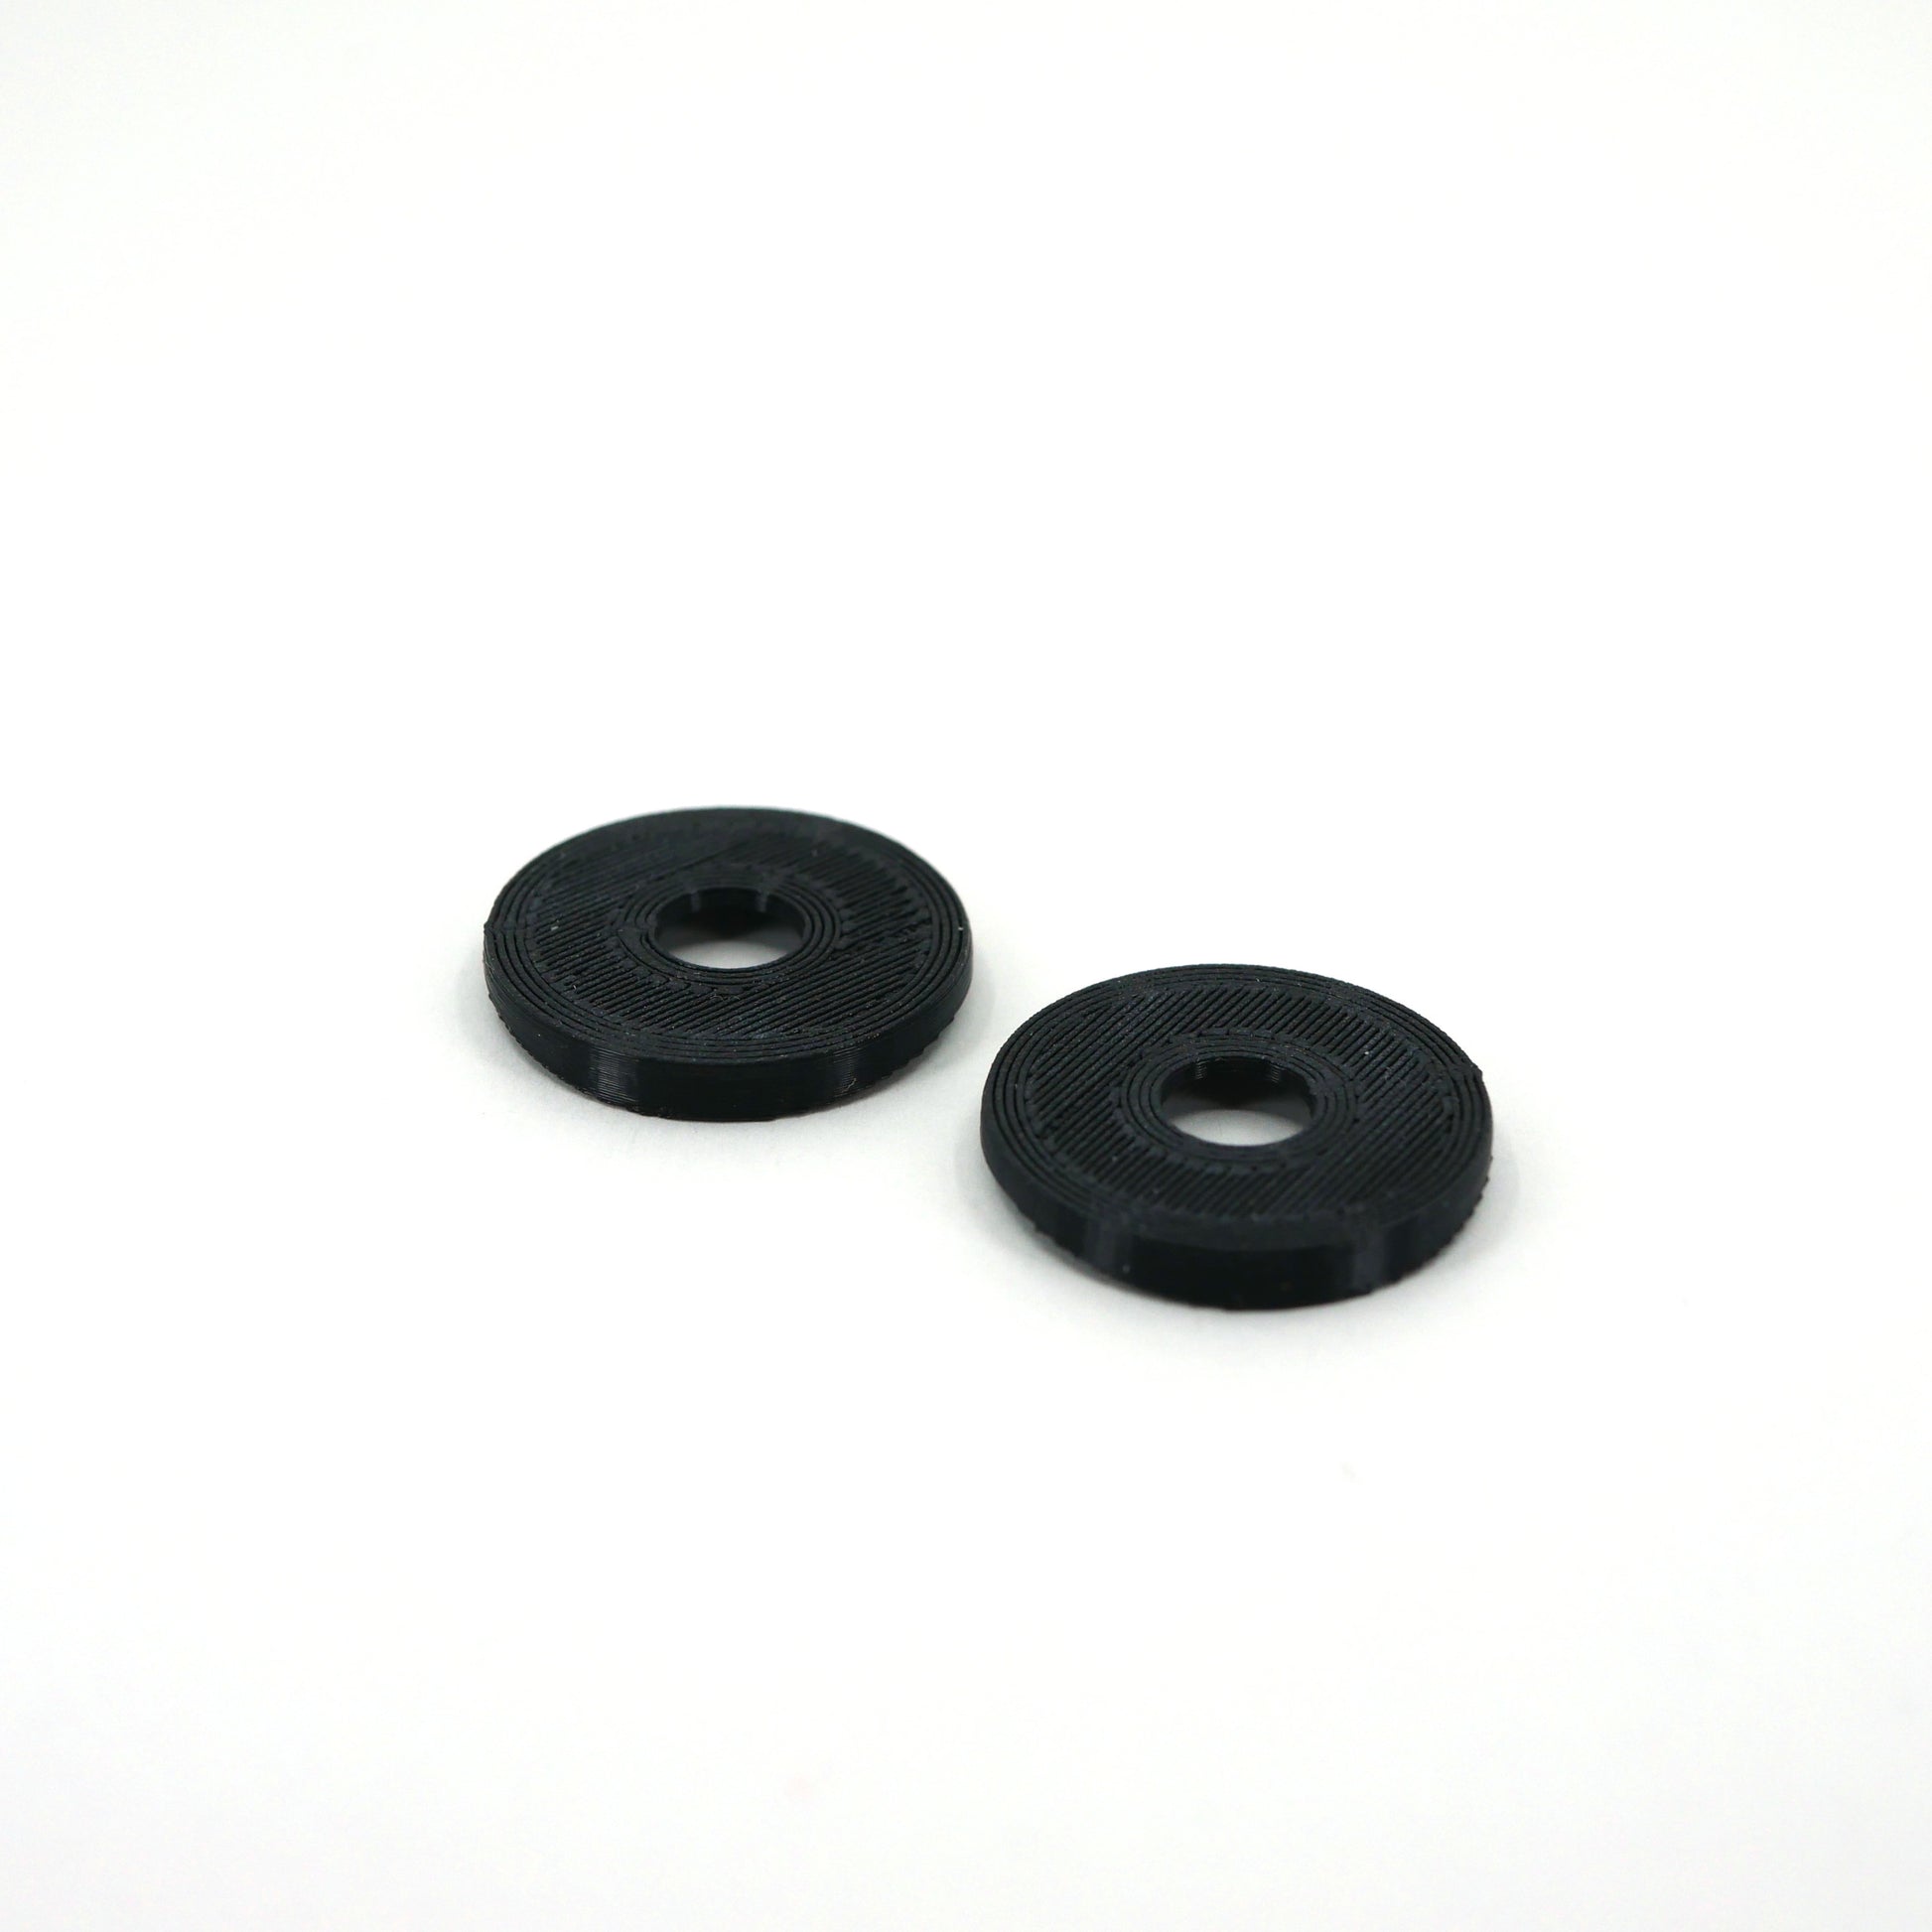 The bottom of two black microphone washers for the Blue Yeti microphone.